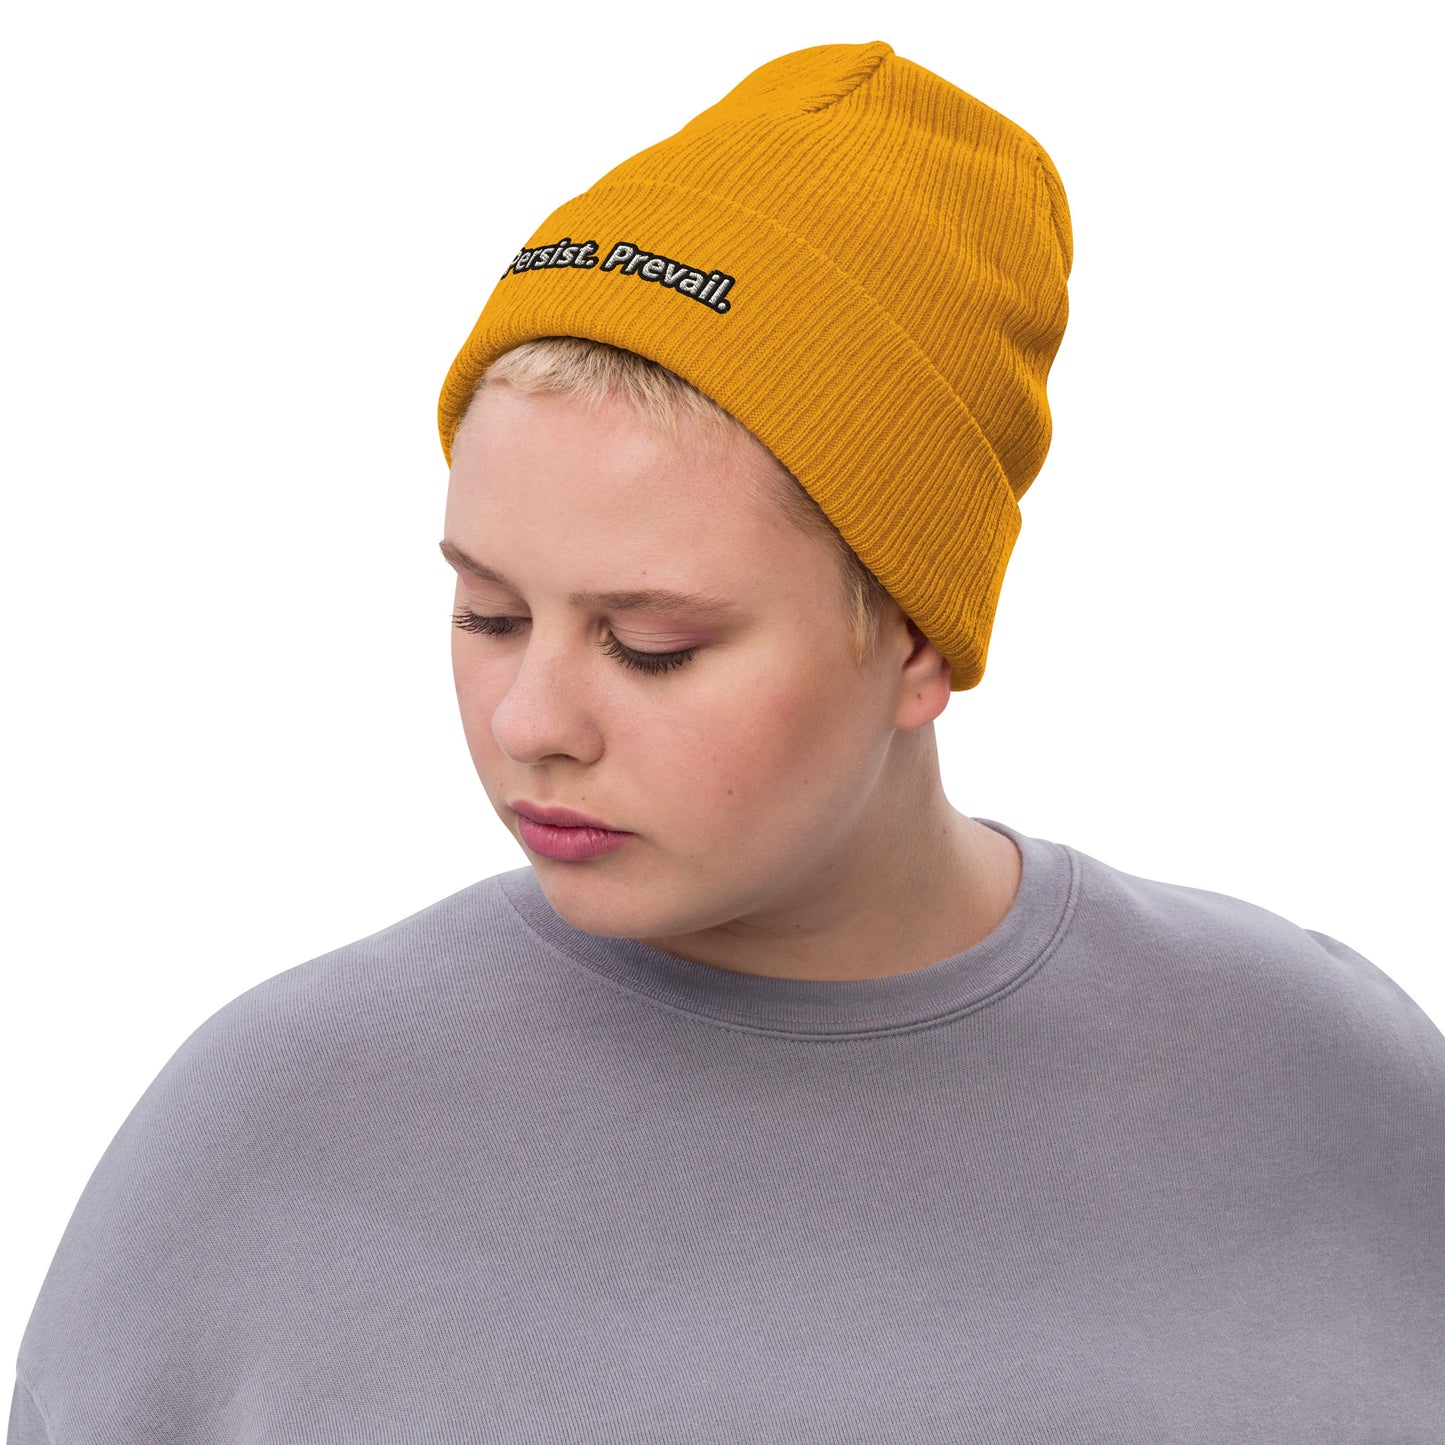 Persist Prevail Ribbed Knit Cuffed Beanie Hat